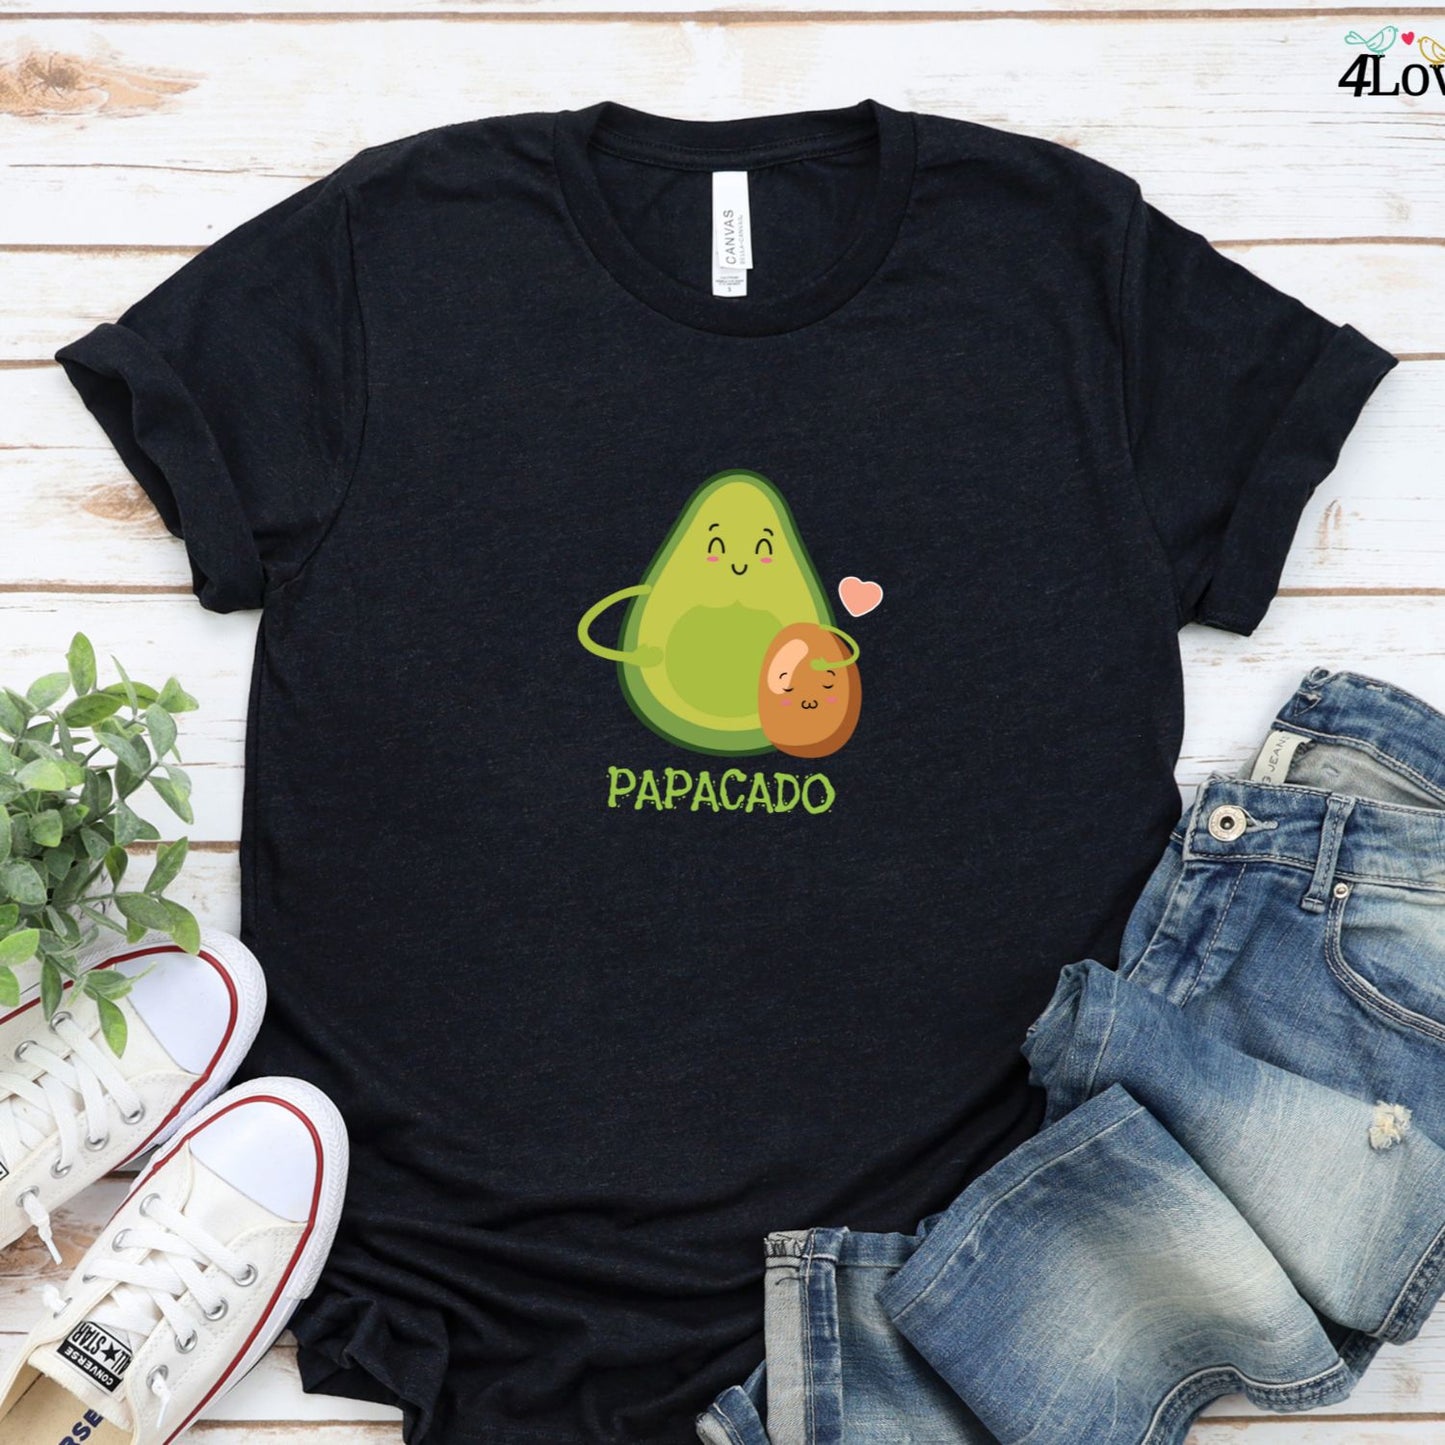 Mamacado & Papacado Matching Set - Eye-Catching Pregnancy Announcement Outfit, Baby Shower Gift